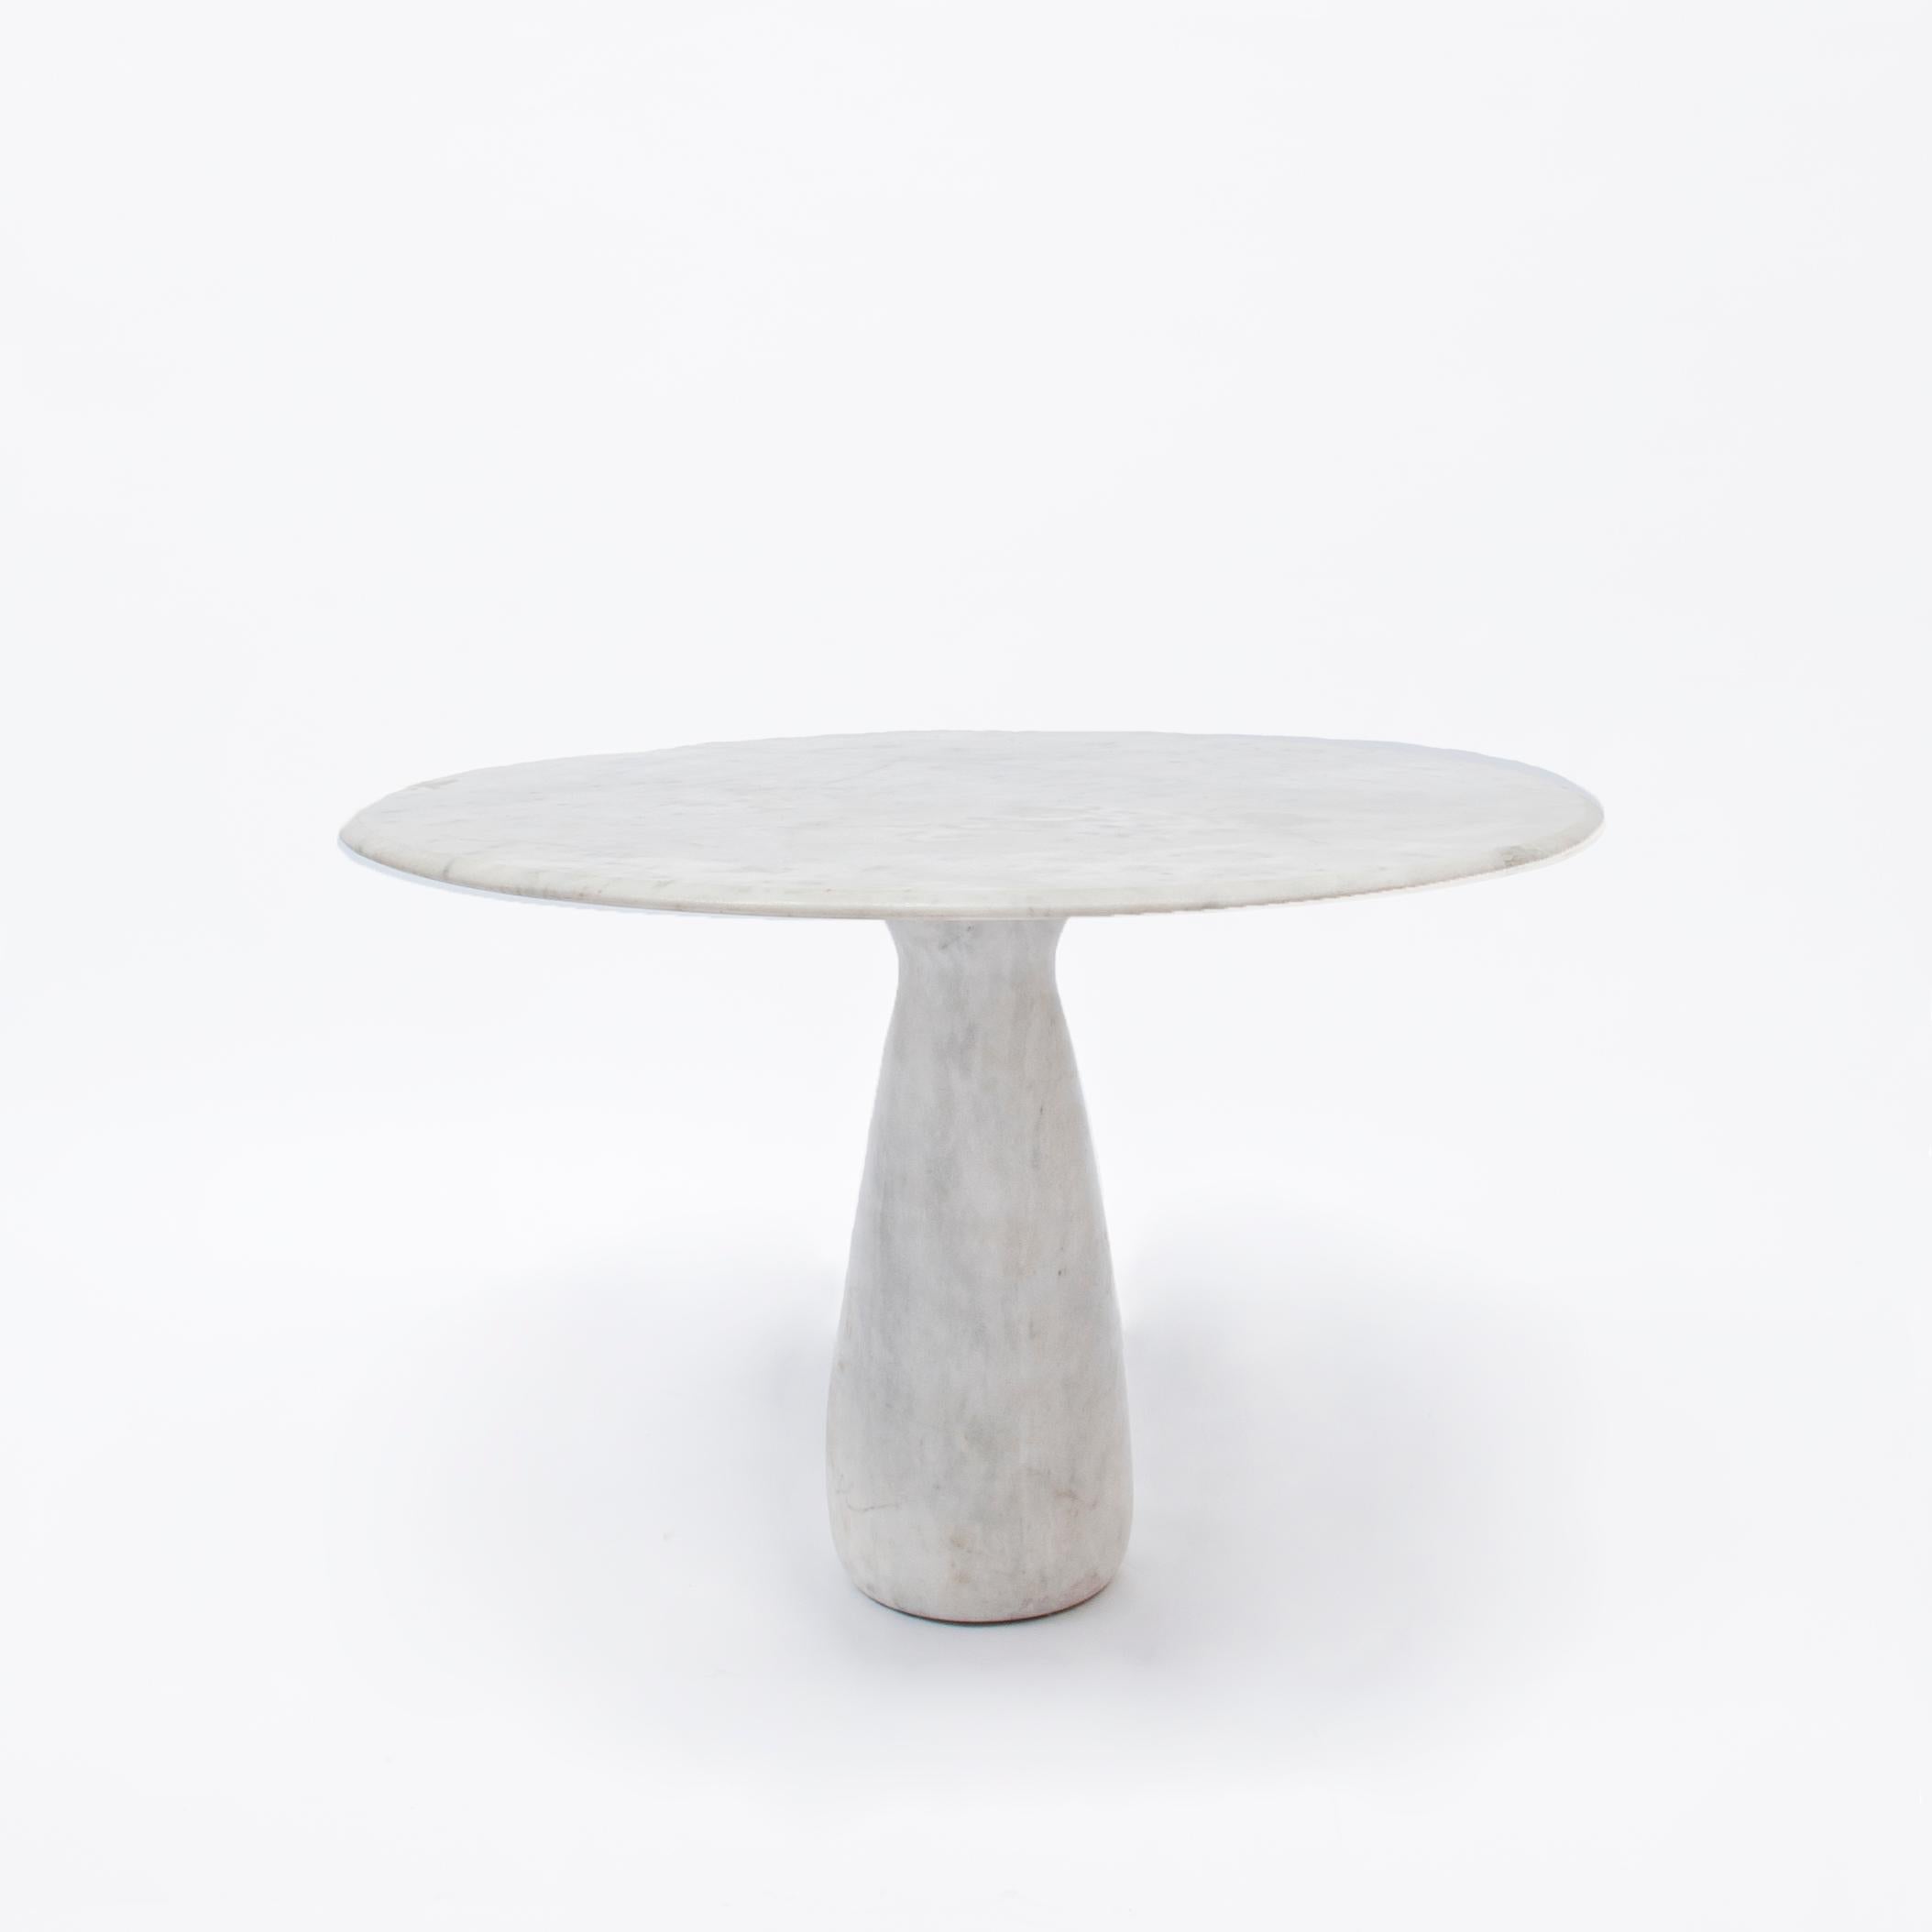 This table is a skillful example of Postmodern design. One solid marble pedestal holds a minimalistic tabletop. A great Classic for a versatile use designed in the midcentury style.